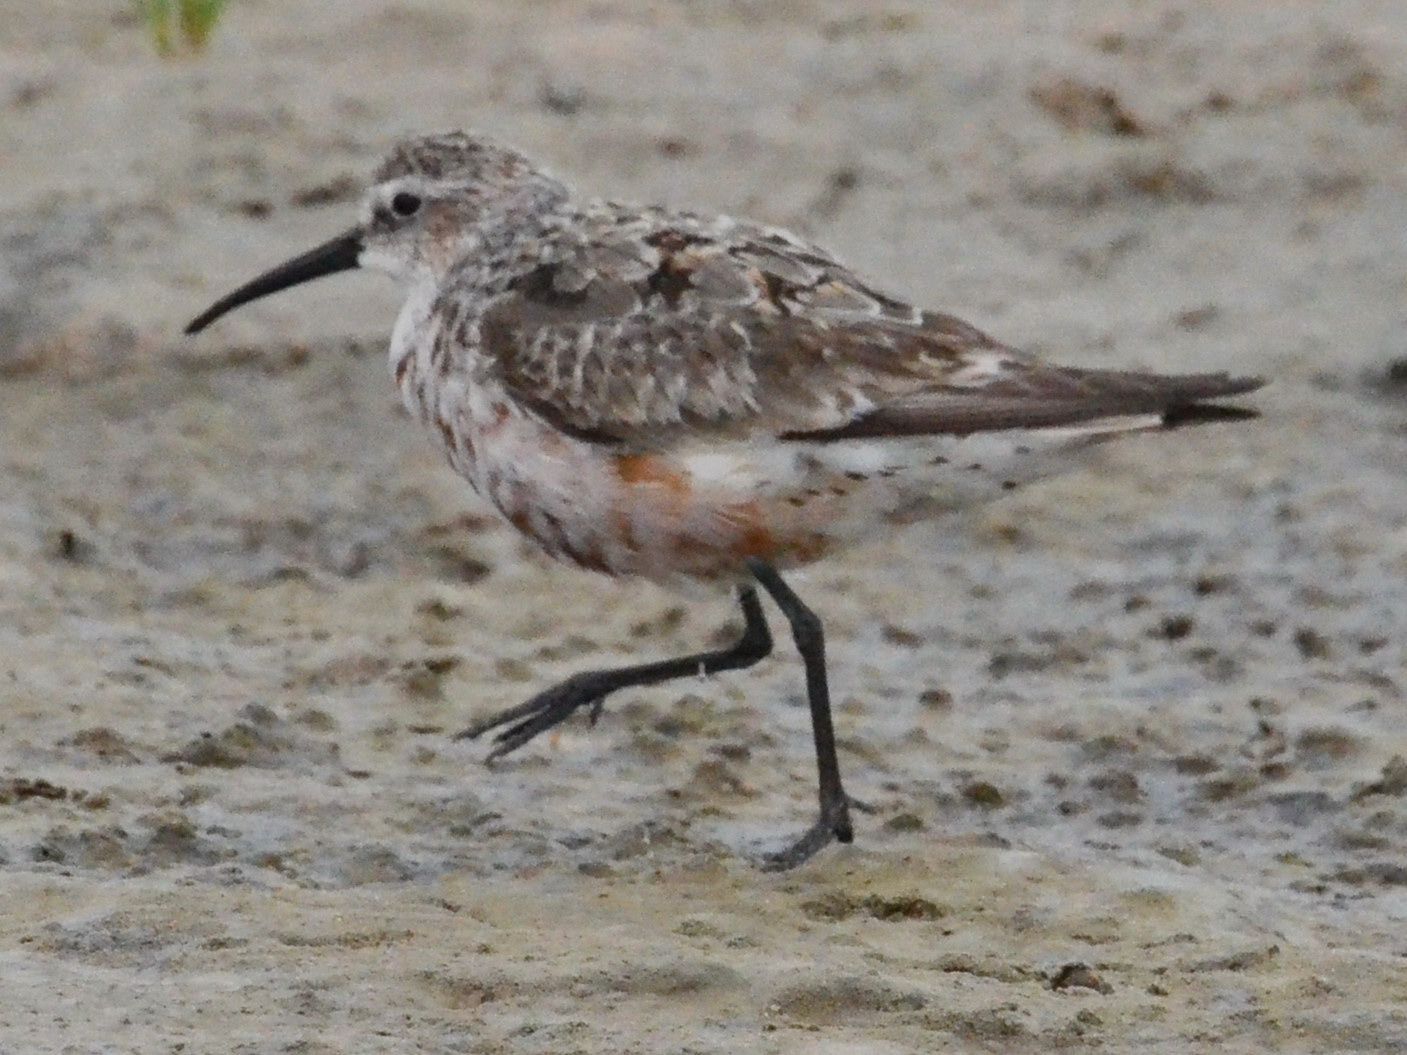 Click picture to see more Curlew Sandpipers.